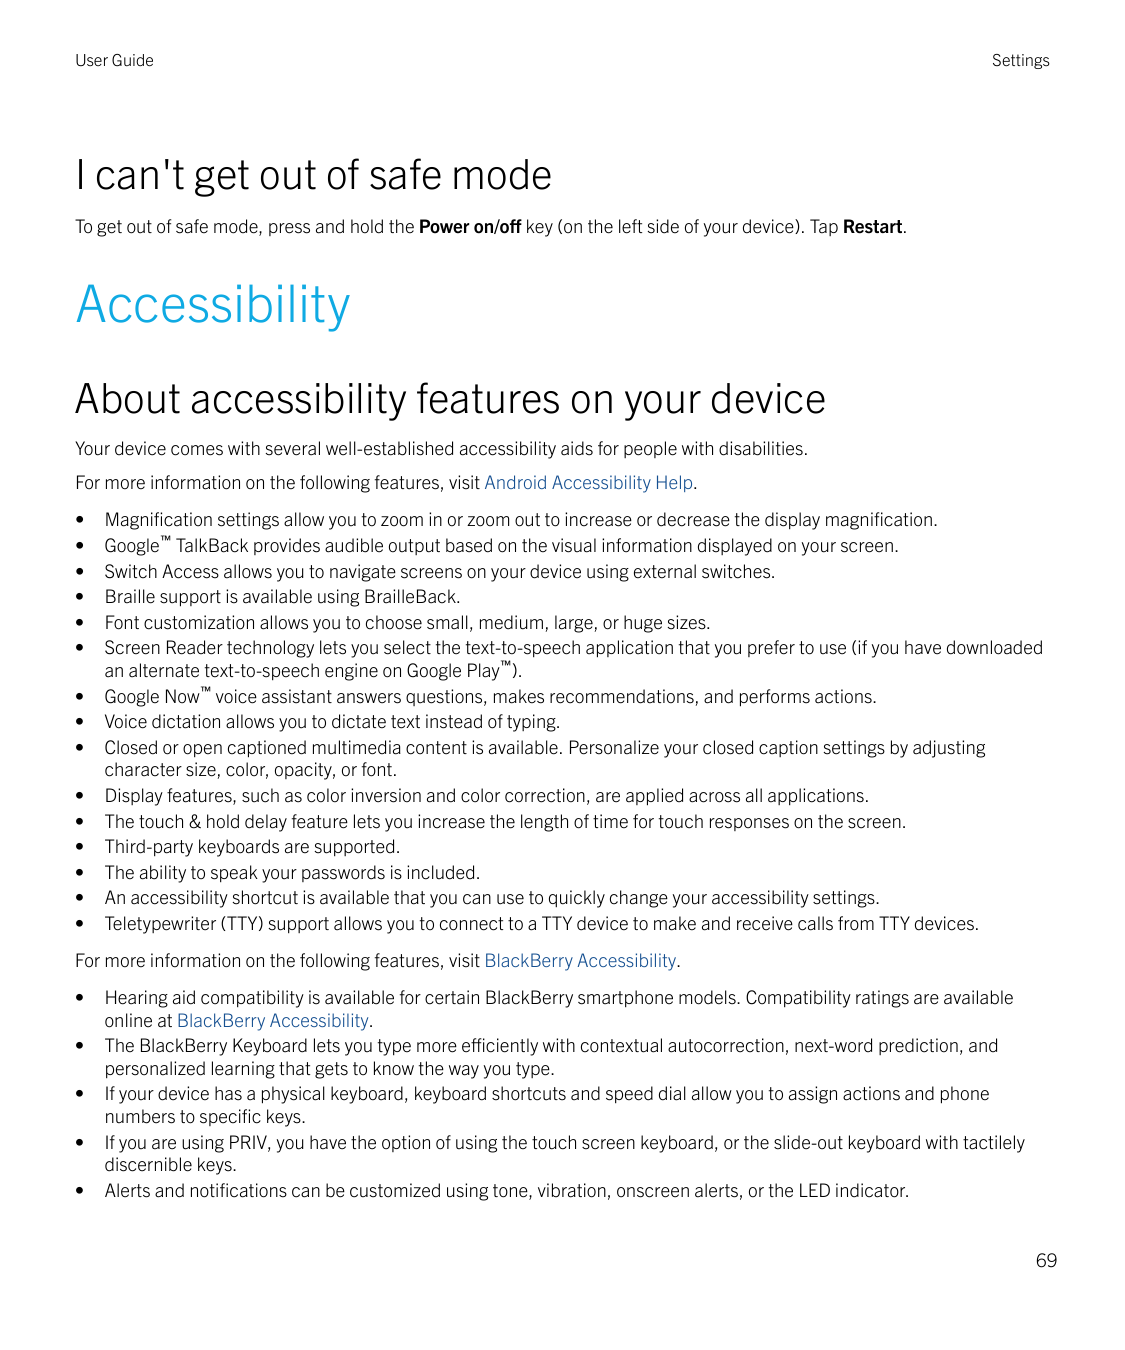 User GuideSettingsI can't get out of safe modeTo get out of safe mode, press and hold the Power on/off key (on the left side of 